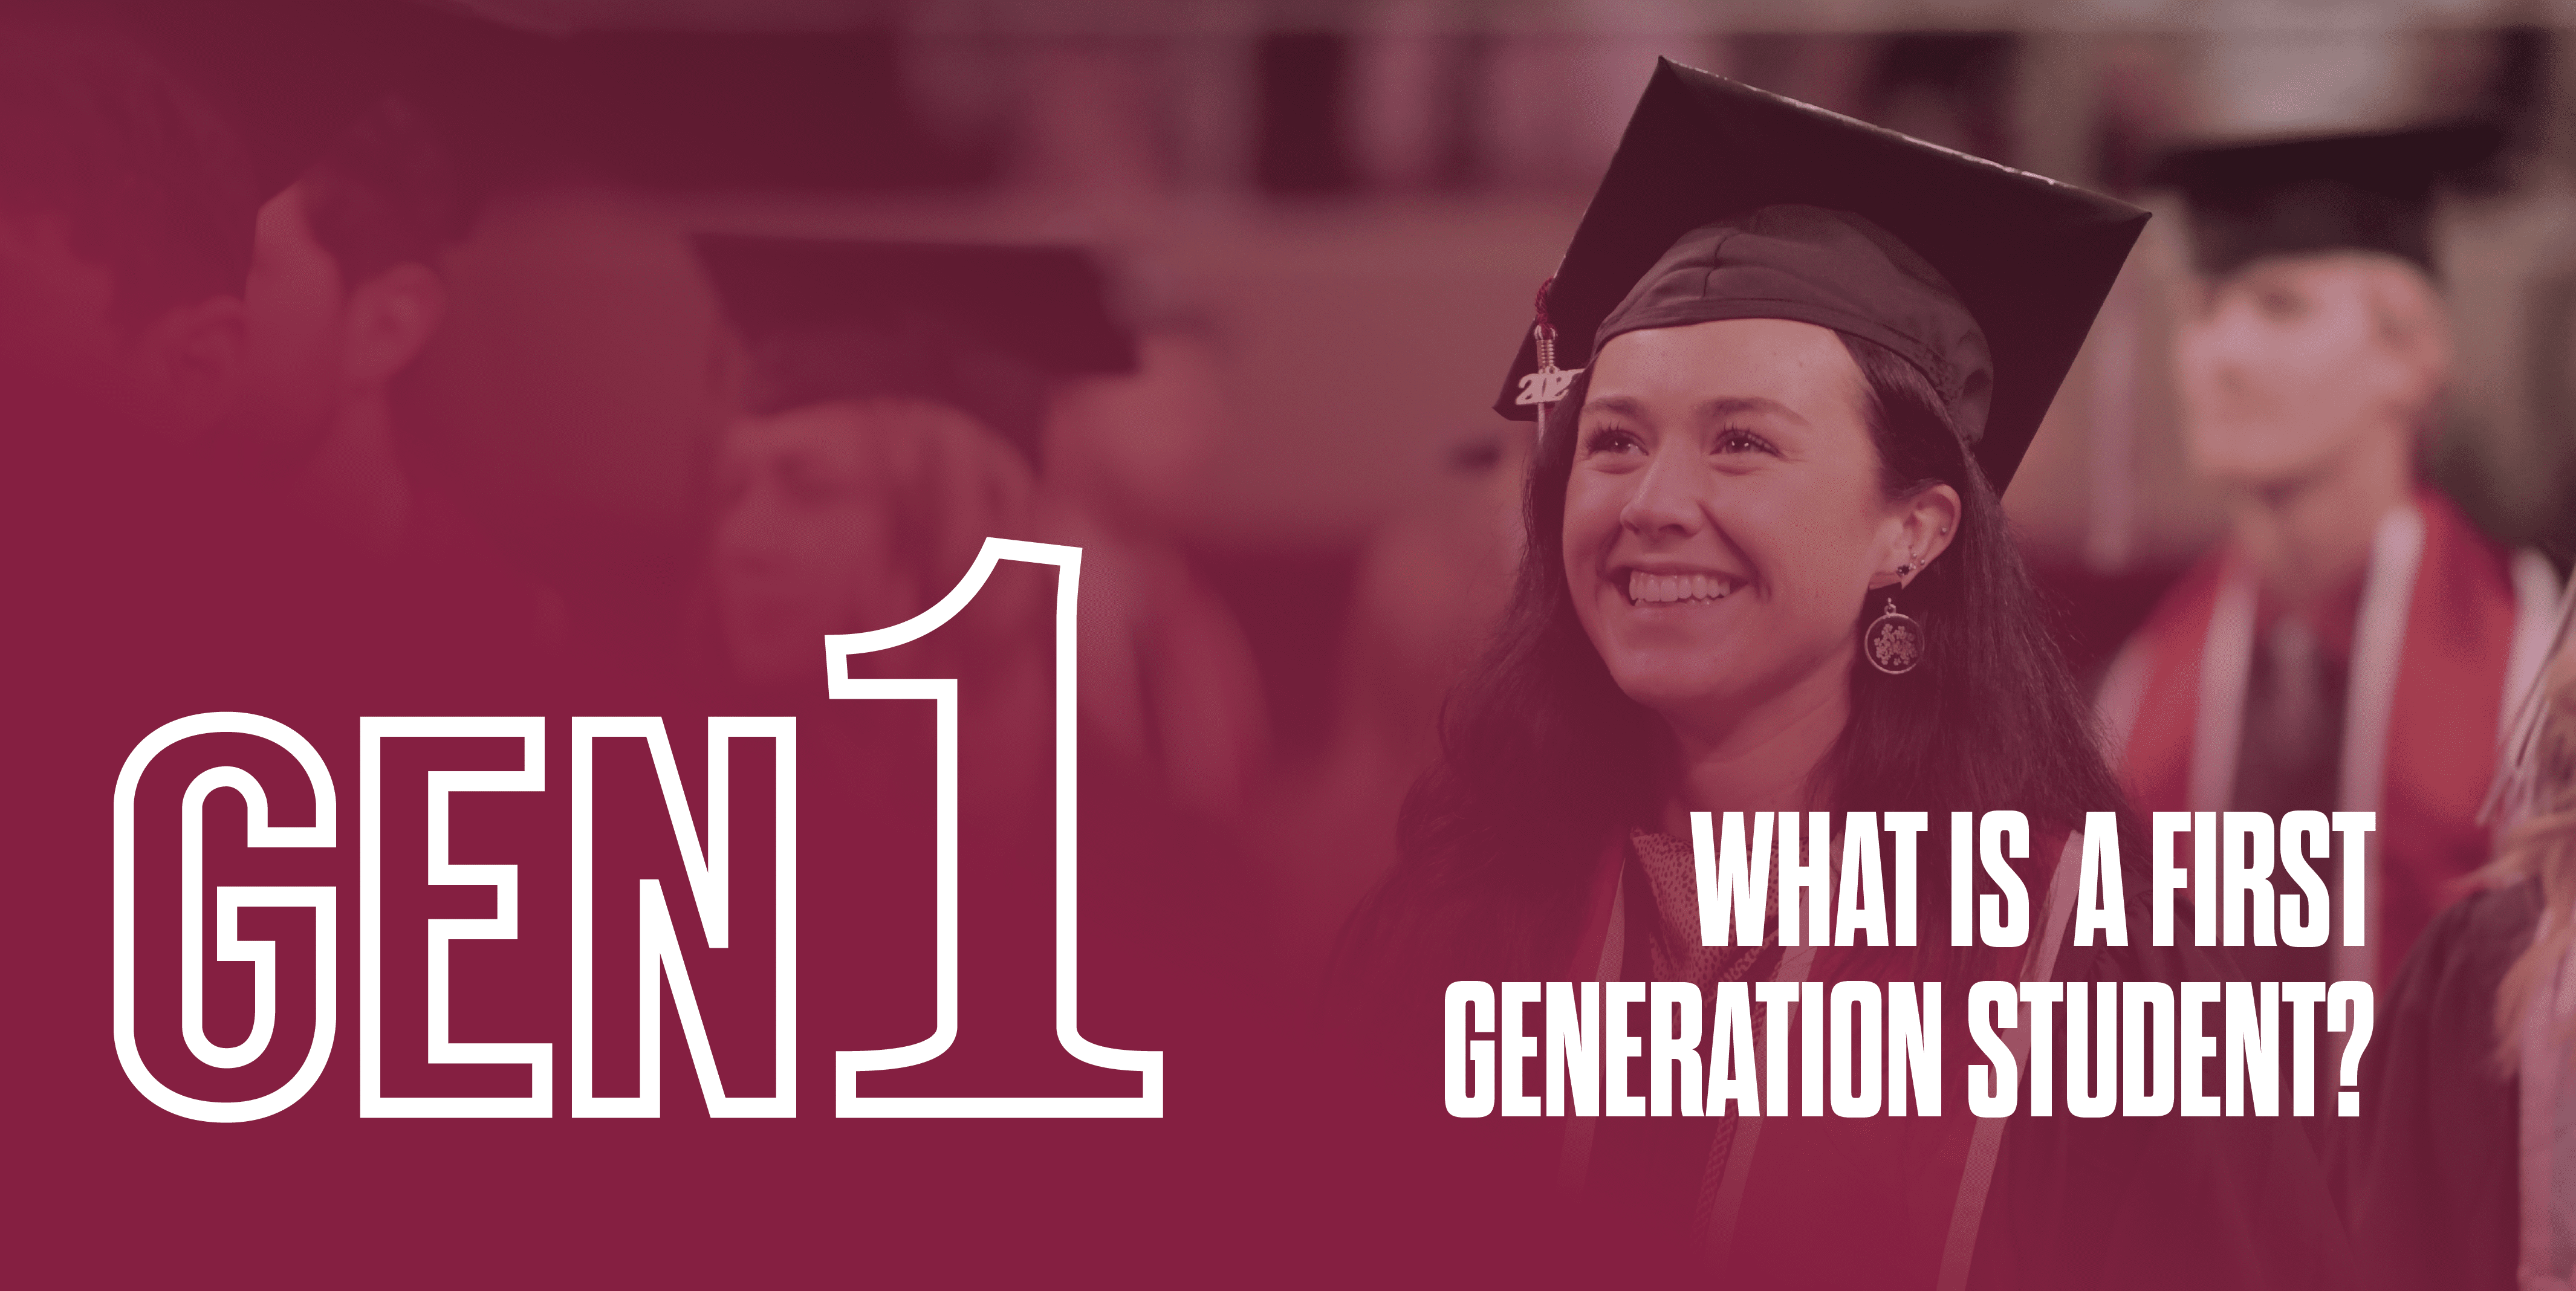 What is a first generation student?